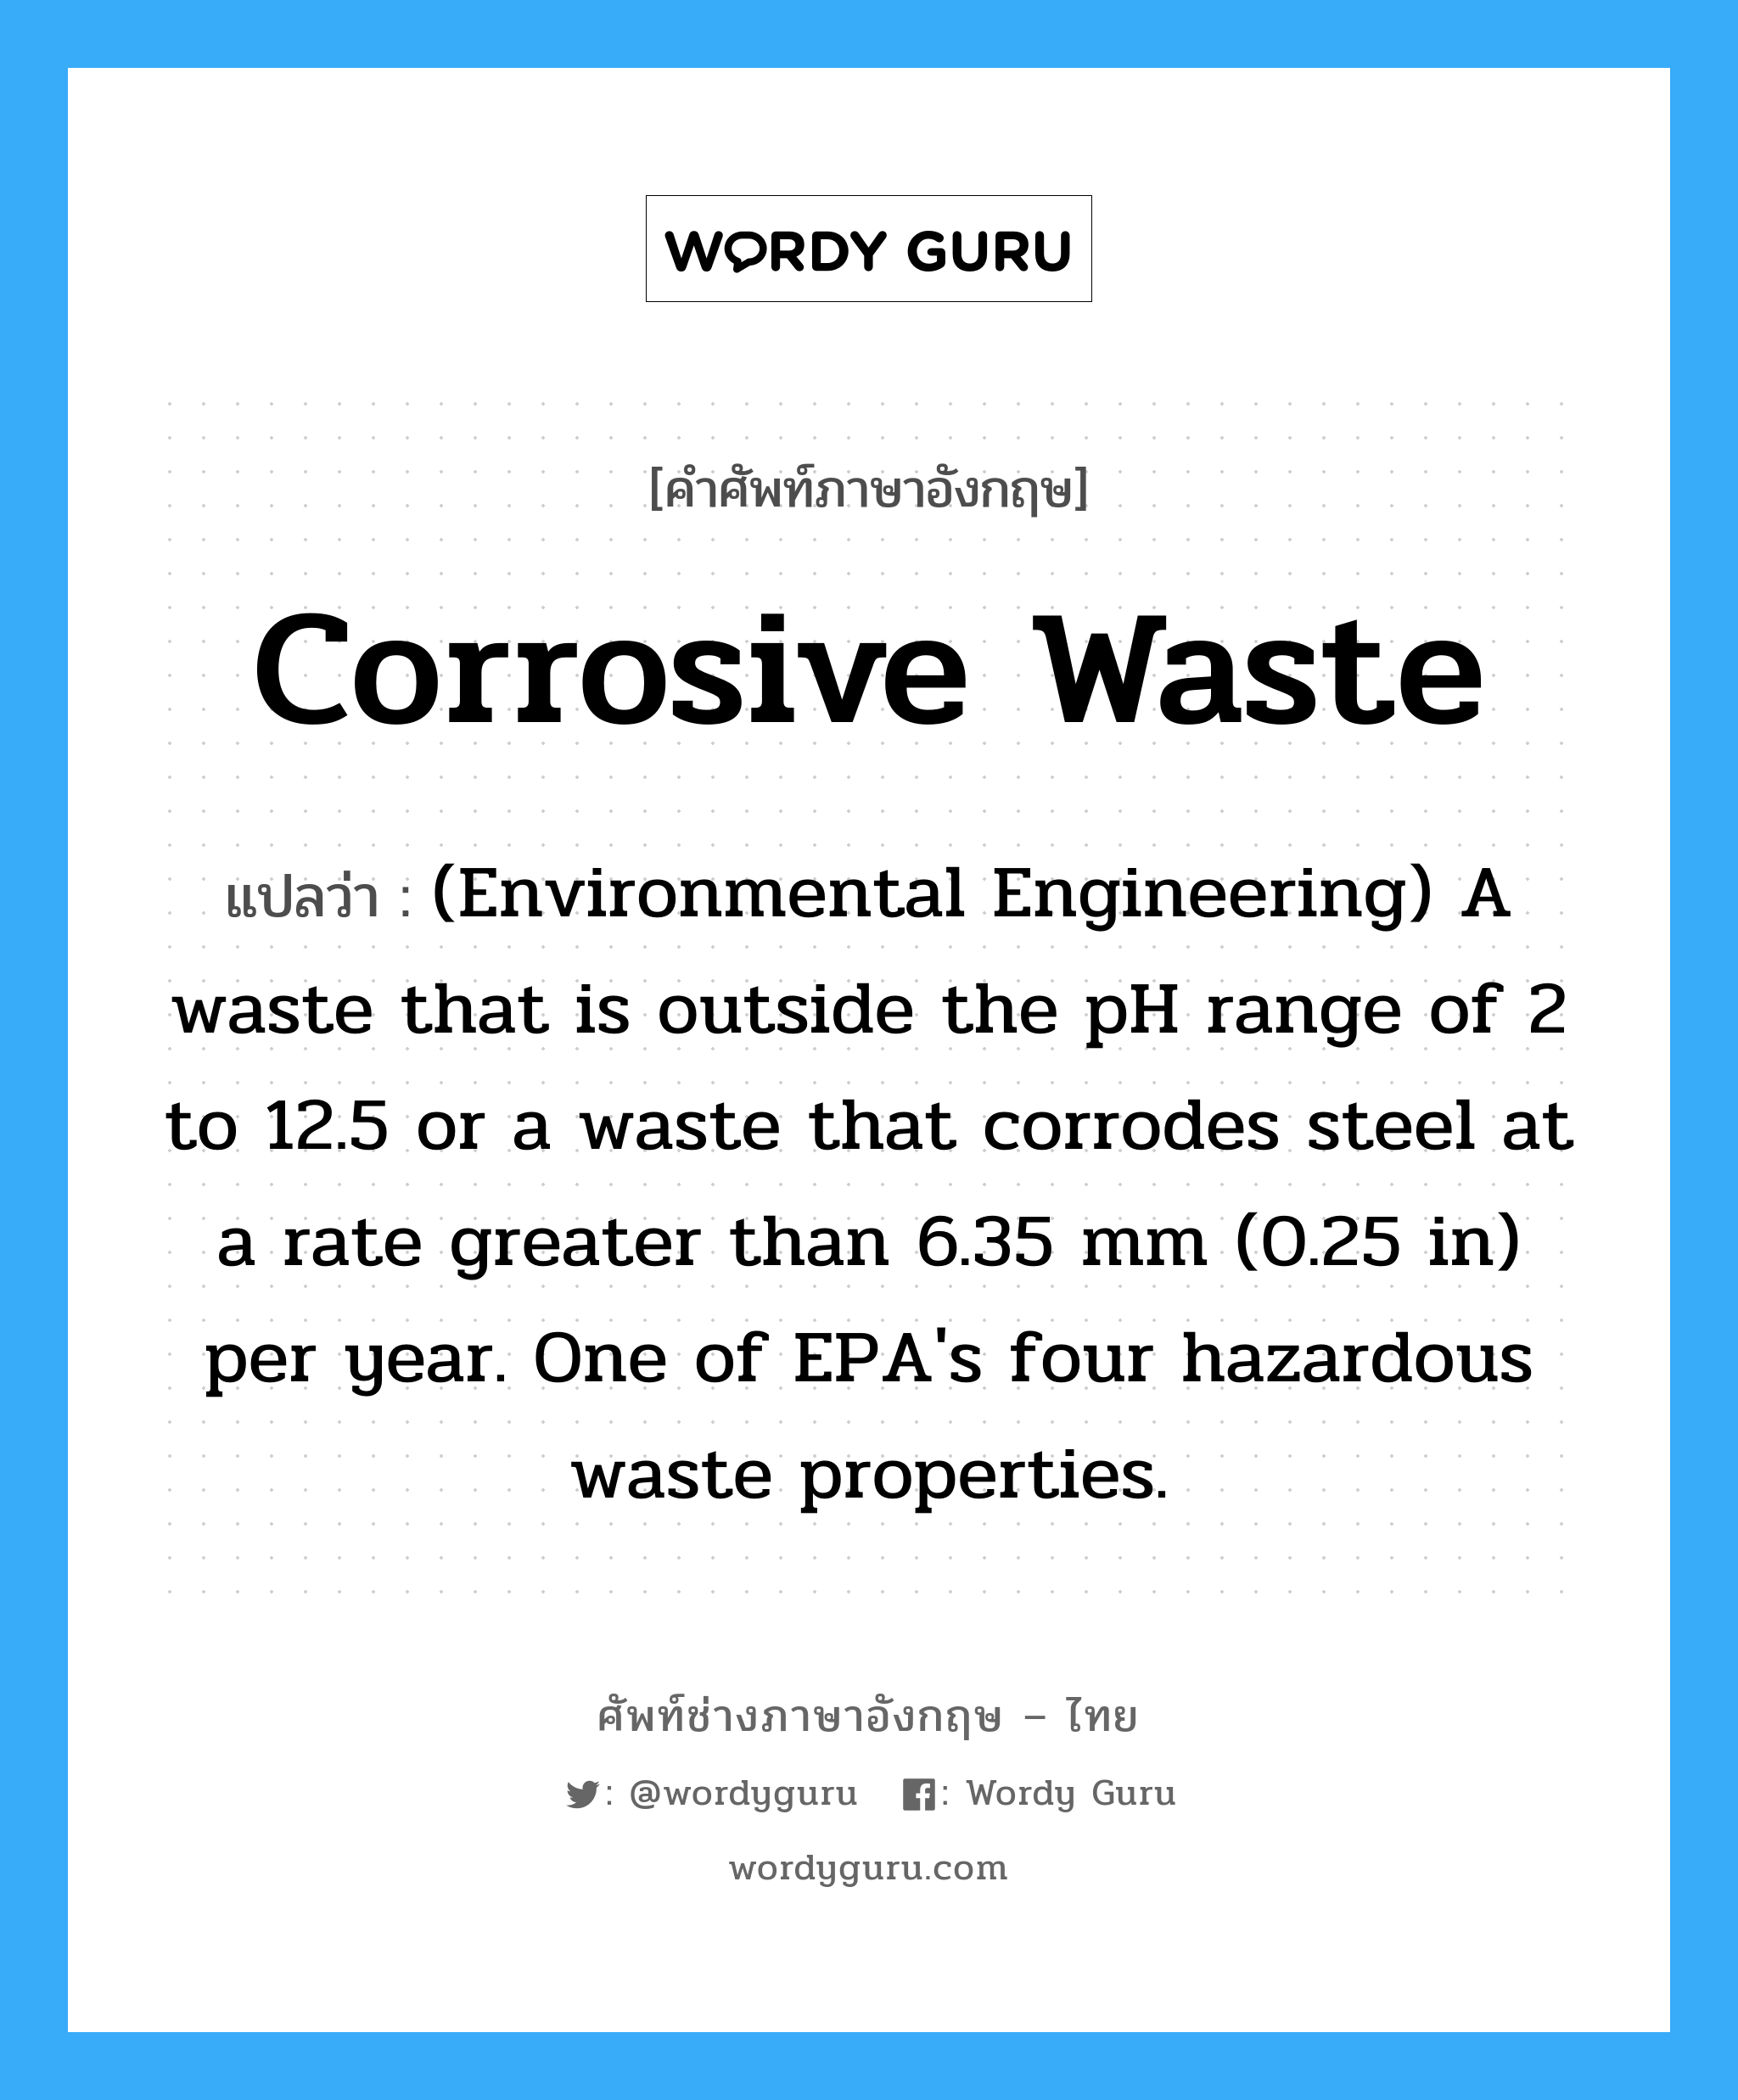 Corrosive waste แปลว่า?, คำศัพท์ช่างภาษาอังกฤษ - ไทย Corrosive waste คำศัพท์ภาษาอังกฤษ Corrosive waste แปลว่า (Environmental Engineering) A waste that is outside the pH range of 2 to 12.5 or a waste that corrodes steel at a rate greater than 6.35 mm (0.25 in) per year. One of EPA's four hazardous waste properties.